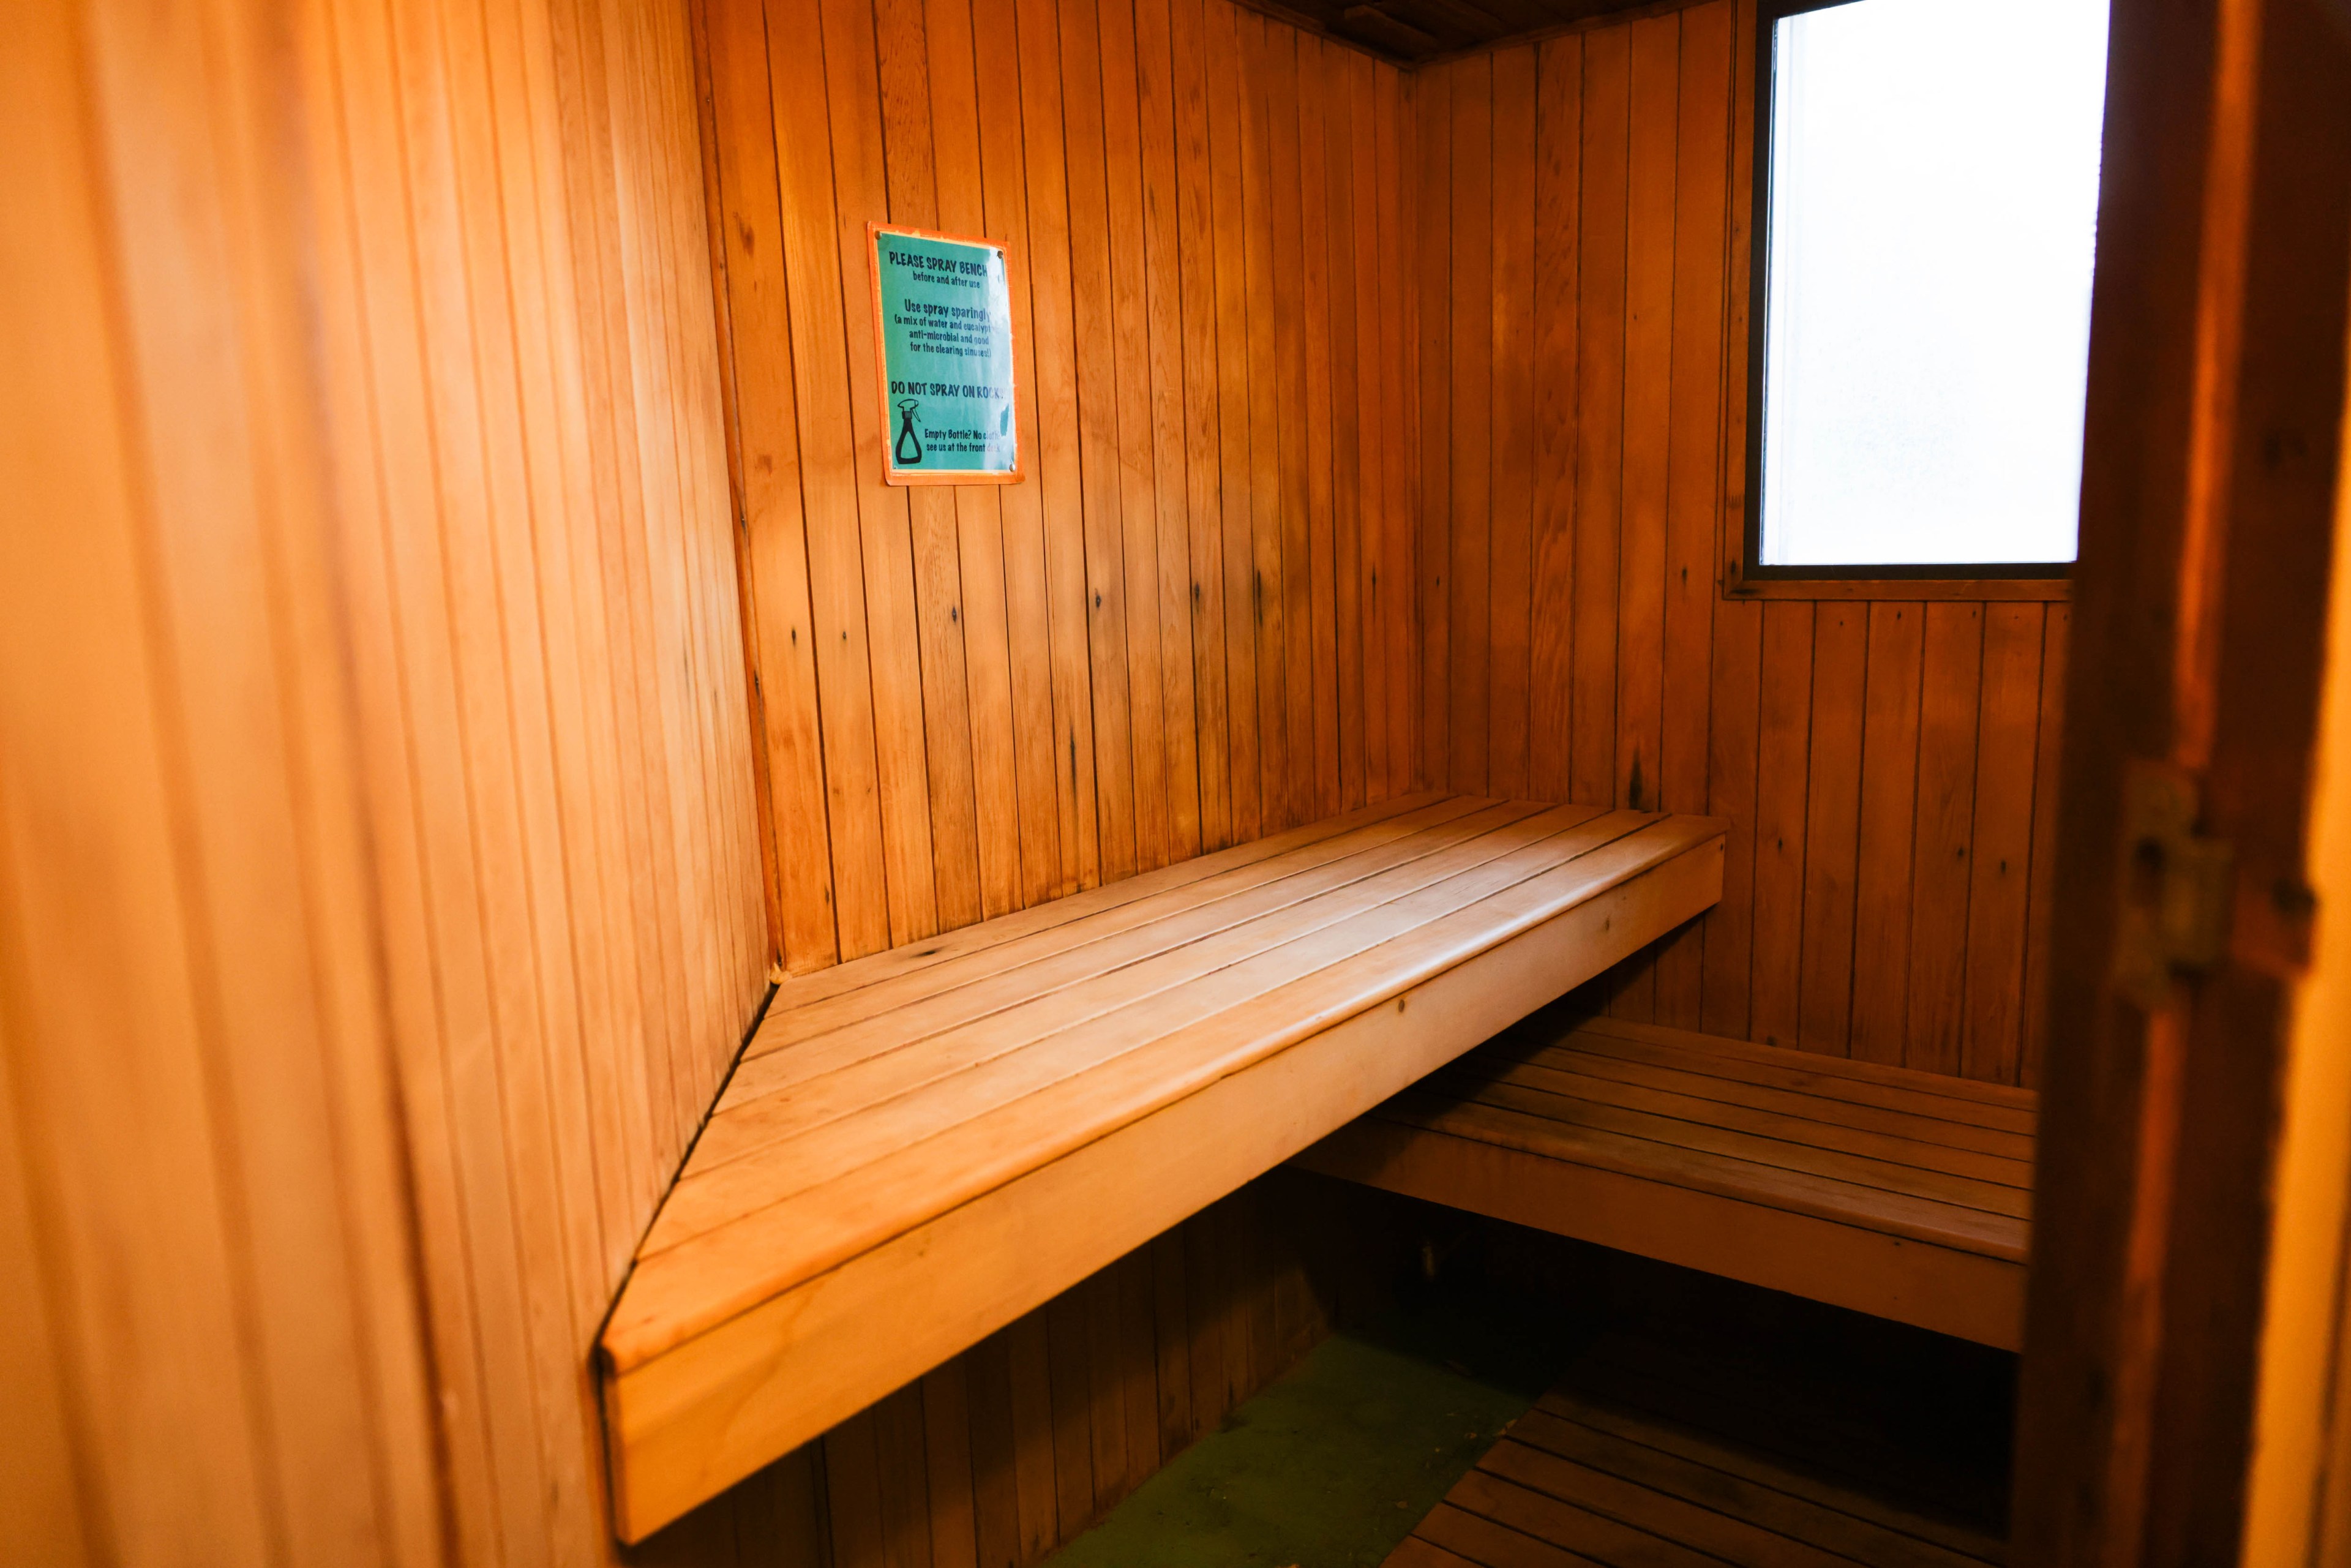 A wooden sauna interior with benches and a frosted window.